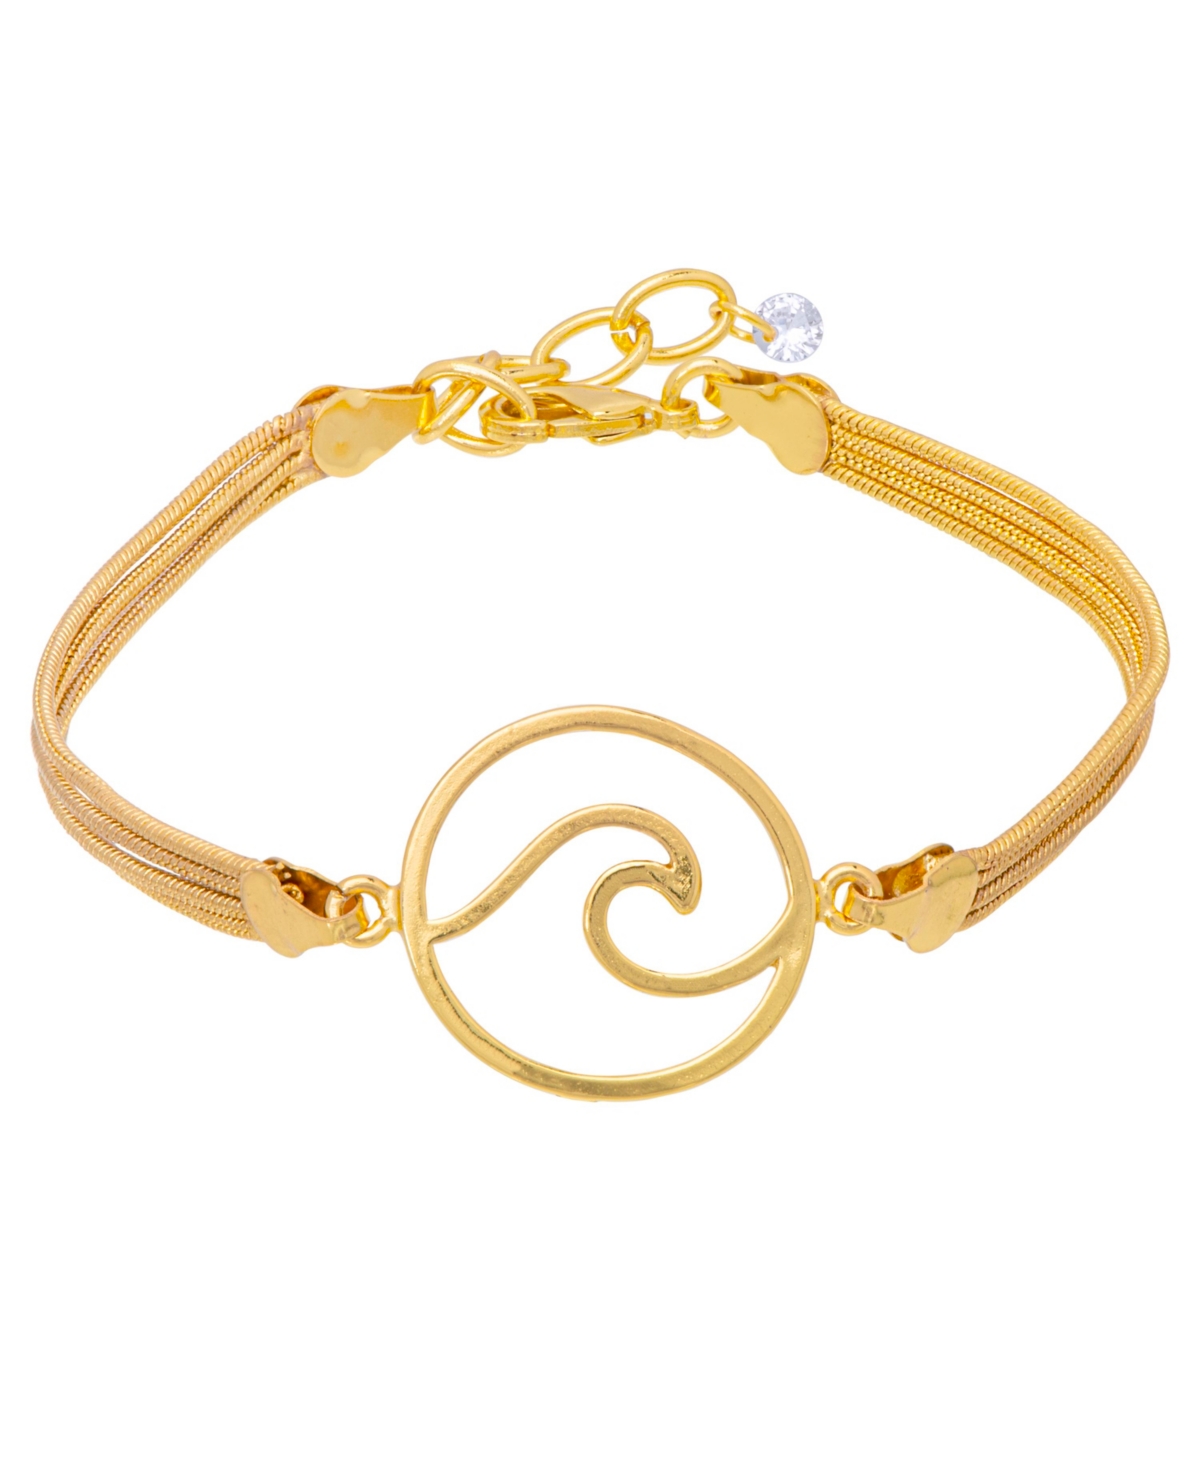 Round Wave Bracelet in Silver Plate or 18K Gold Plated - Gold